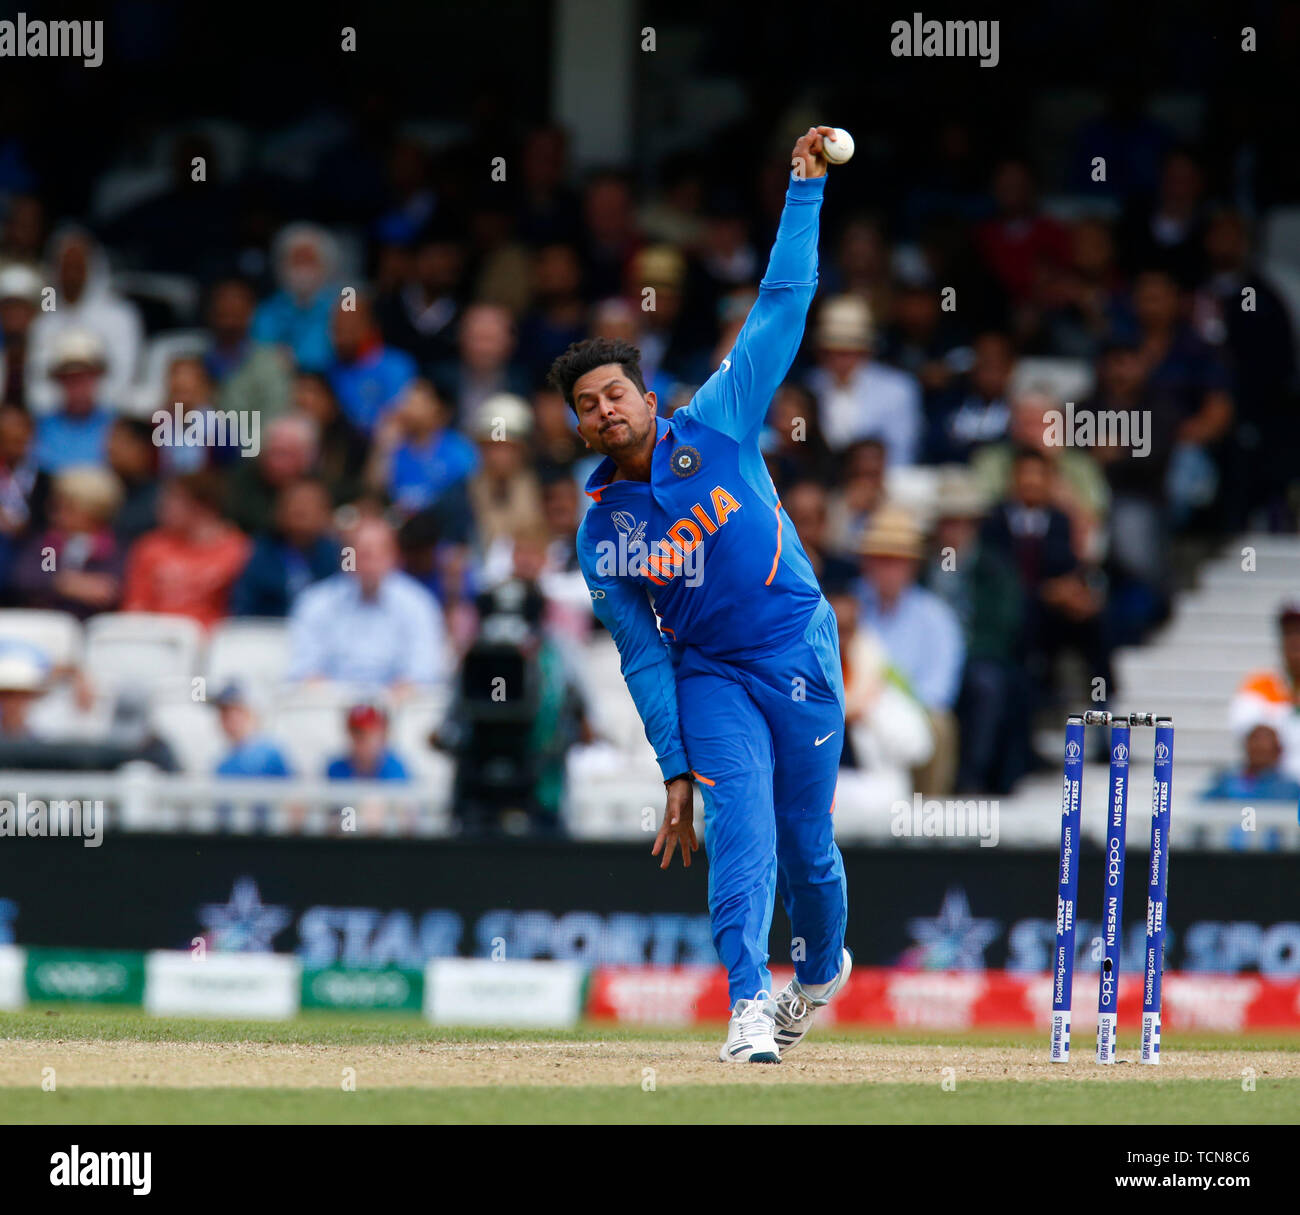 London, UK. 09th June, 2019. LONDON, England. June 09: Kuldeep Yadav of  India during ICC Cricket World Cup between India and Australia at the Oval  Stadium on 09 June 2019 in London,